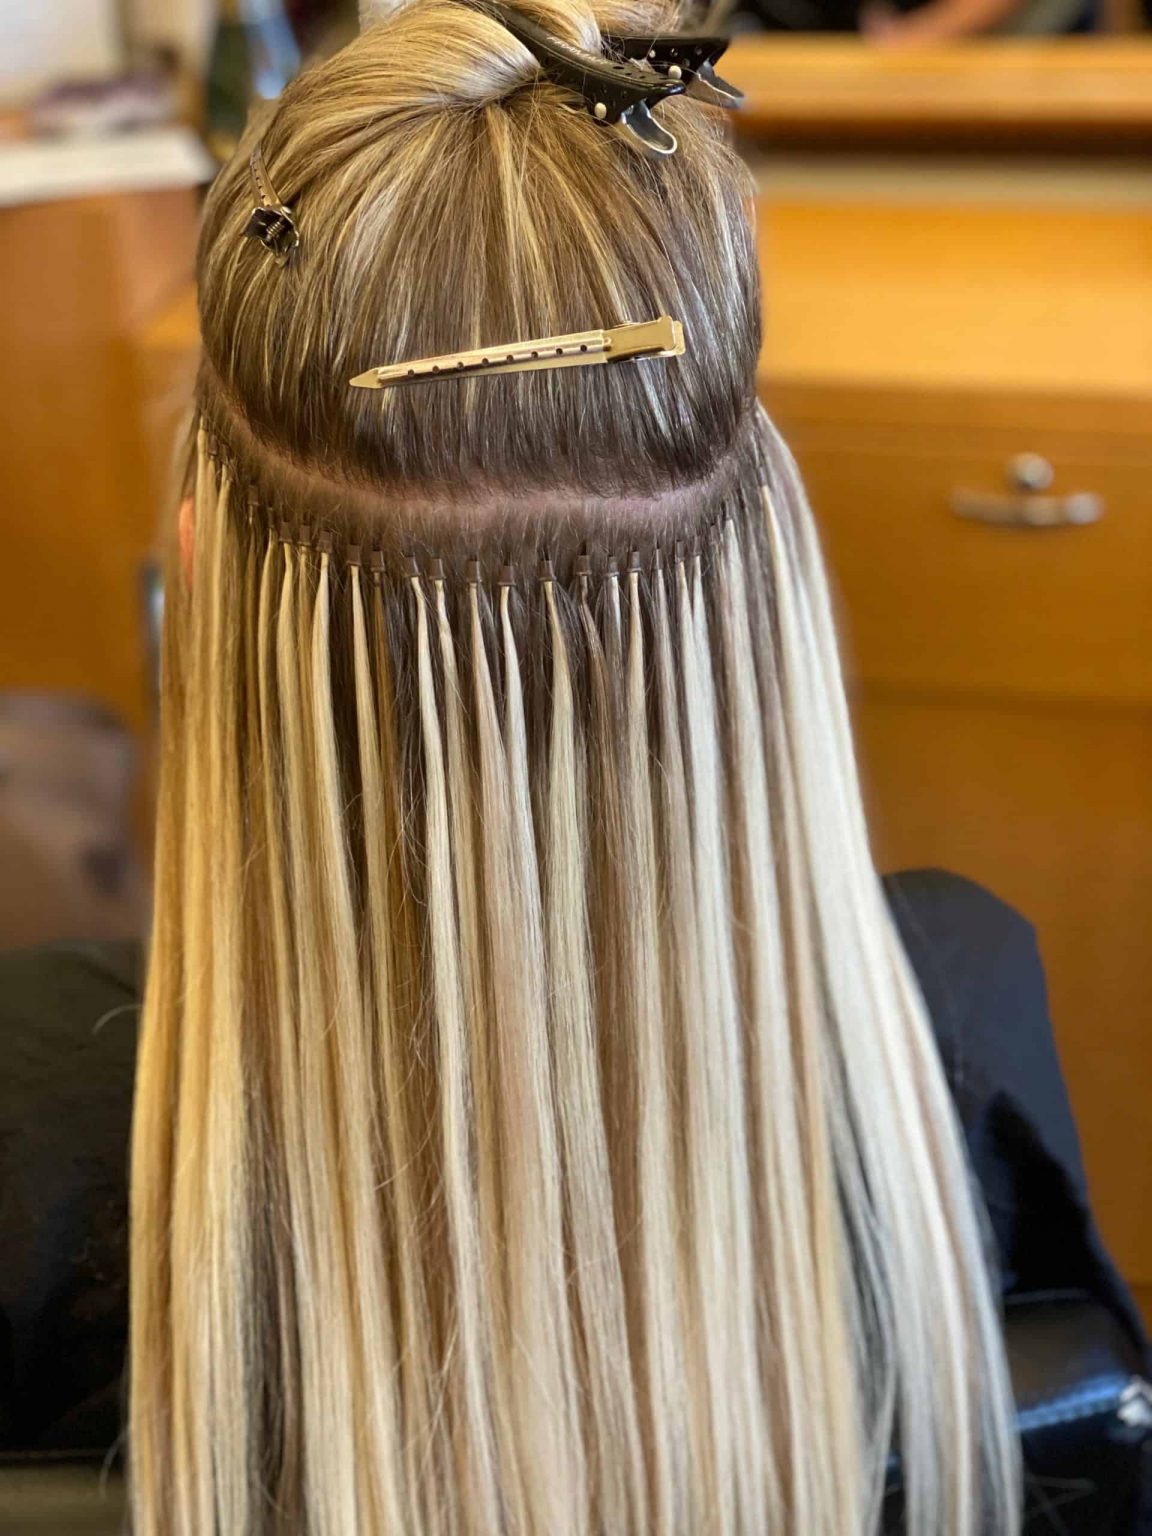 Hair Extension Pros And Cons All For Fashion Design 